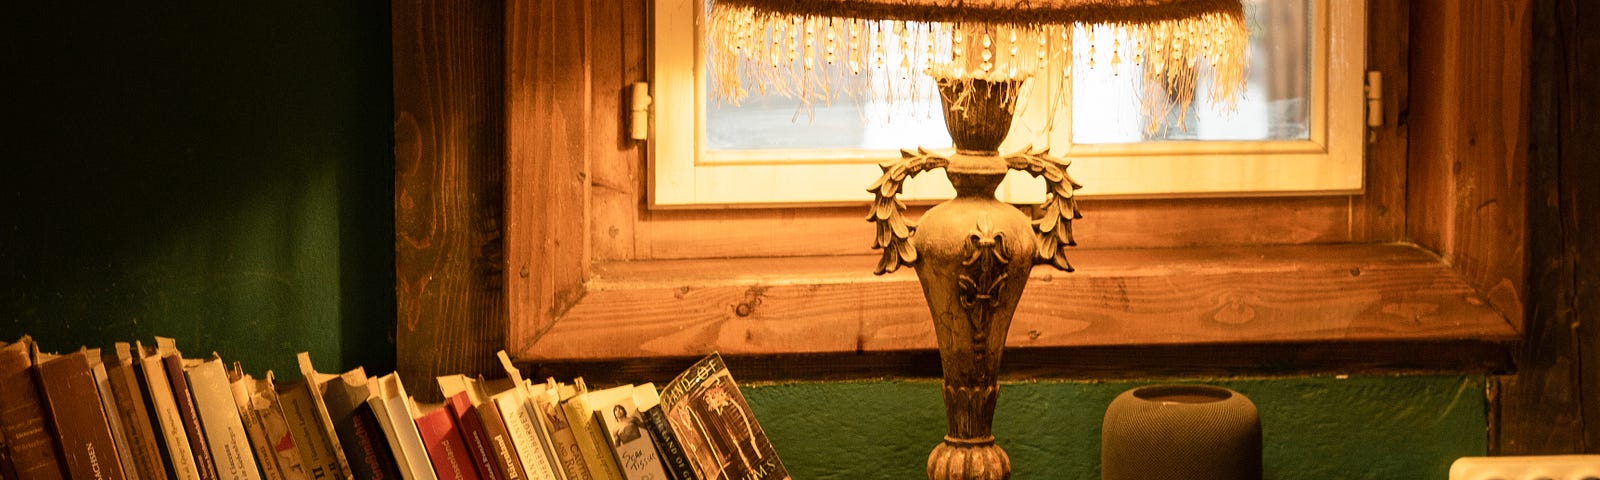 A bookshelf with a lighted lamp on it, with a window in the background.